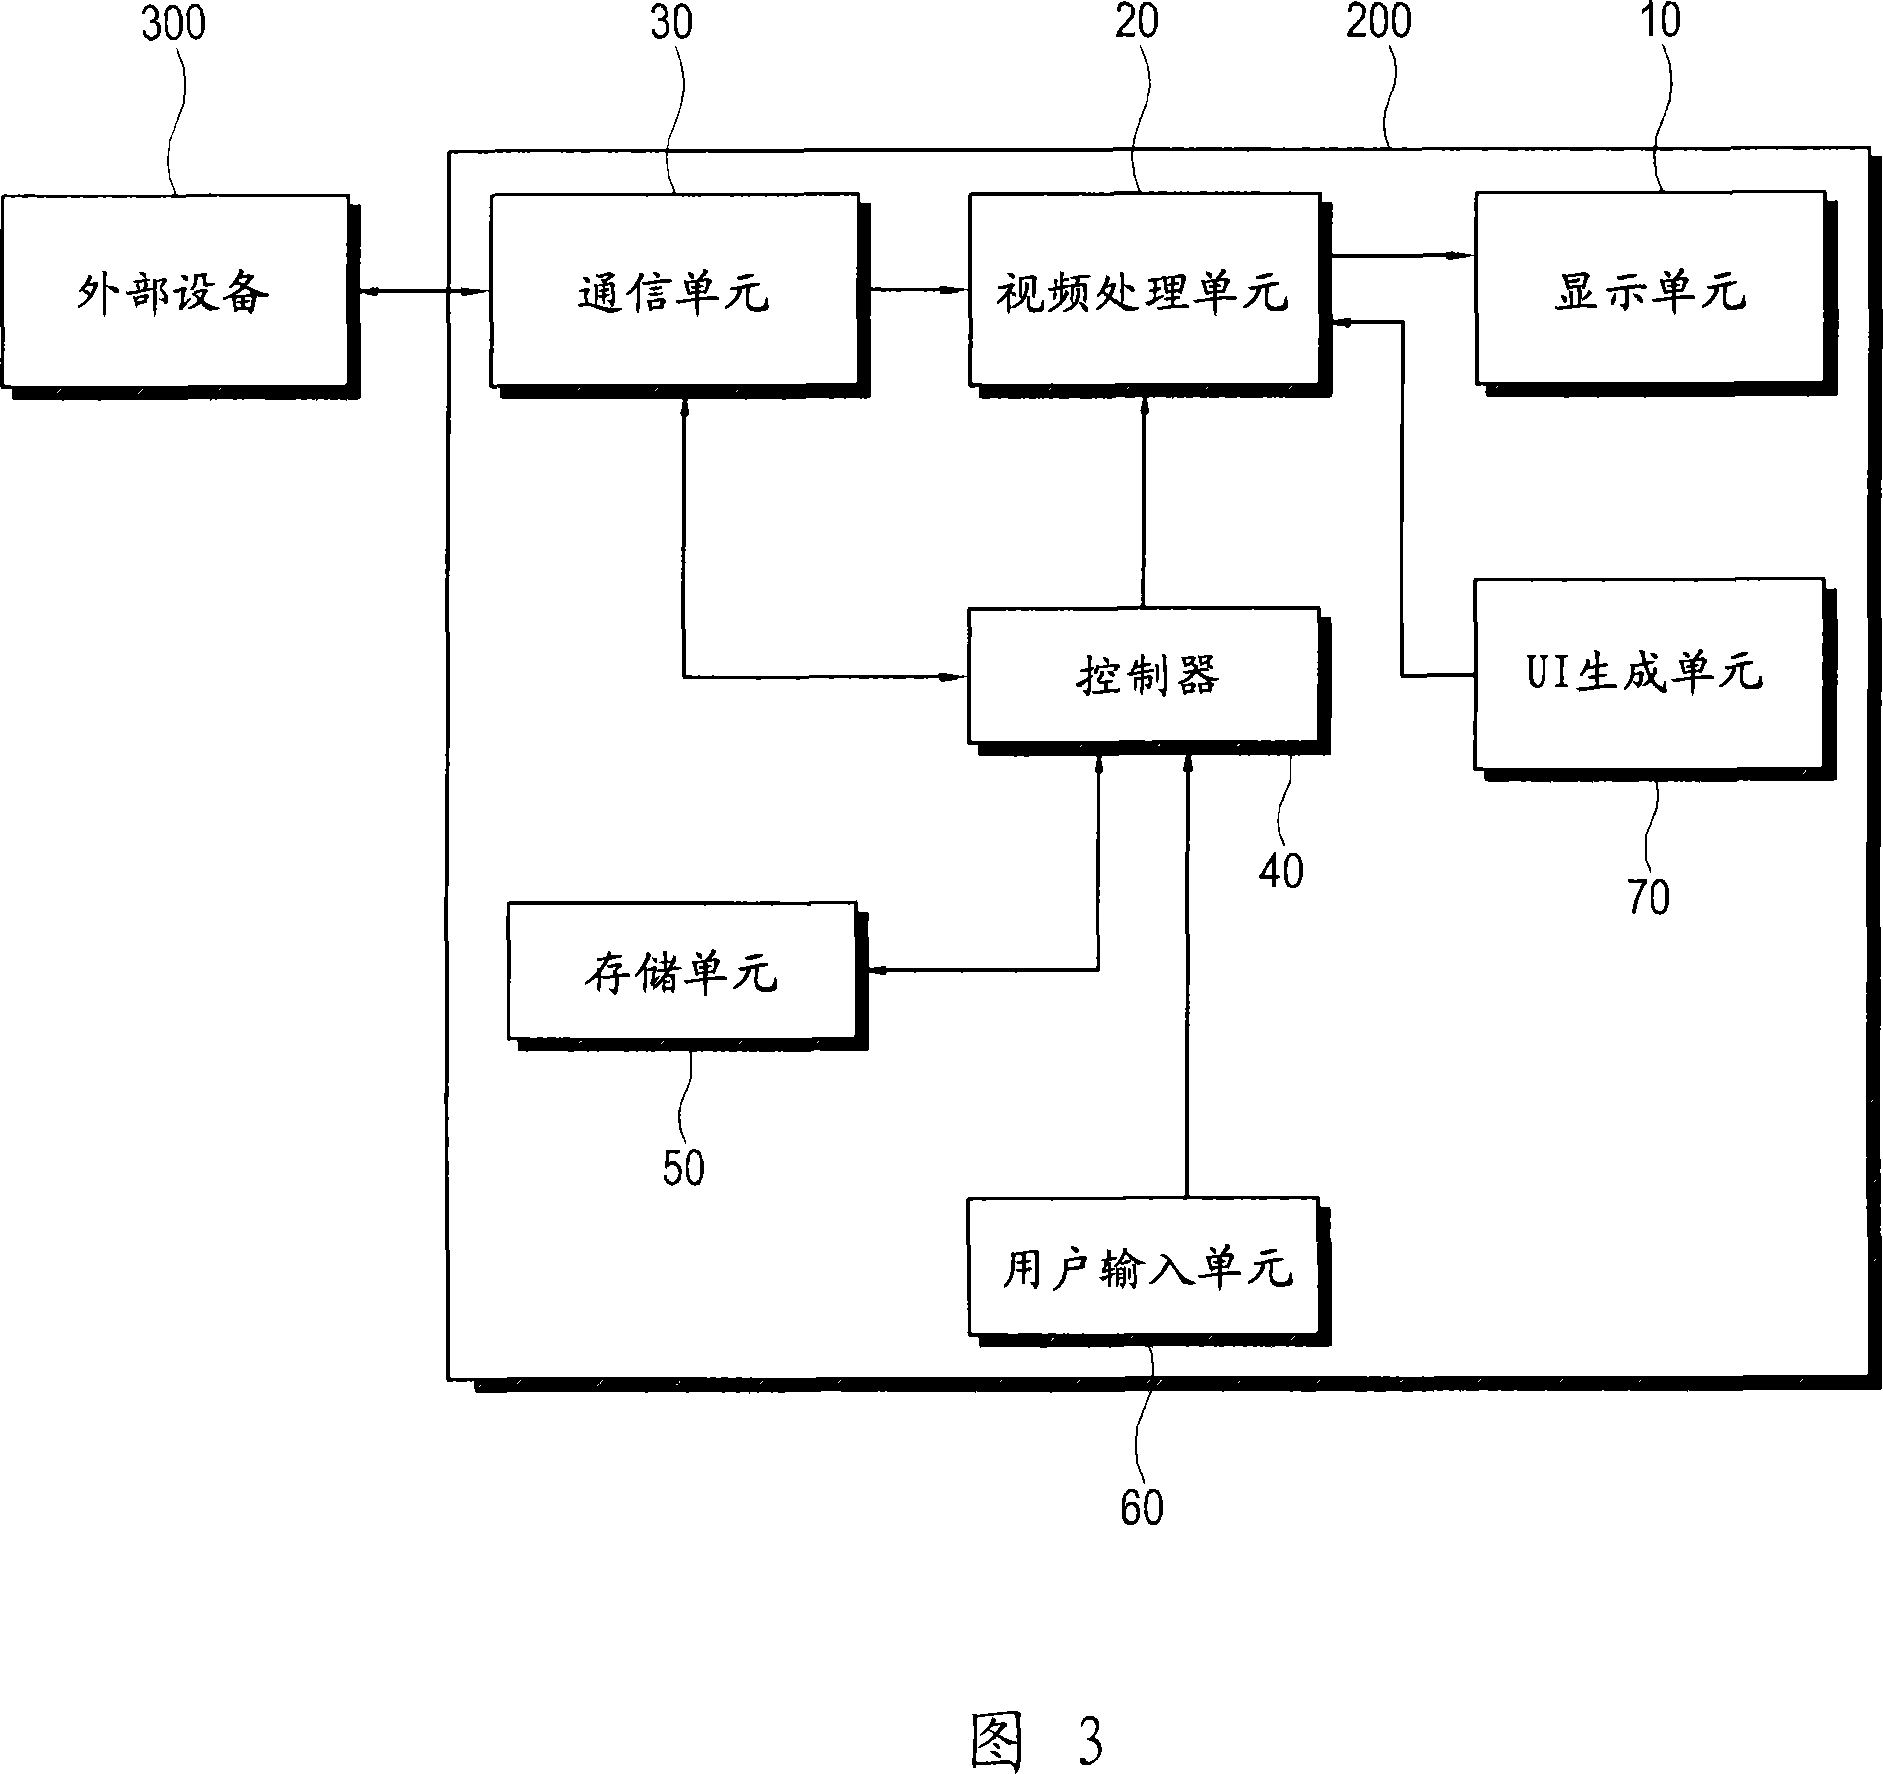 Display device and method of controlling external devices